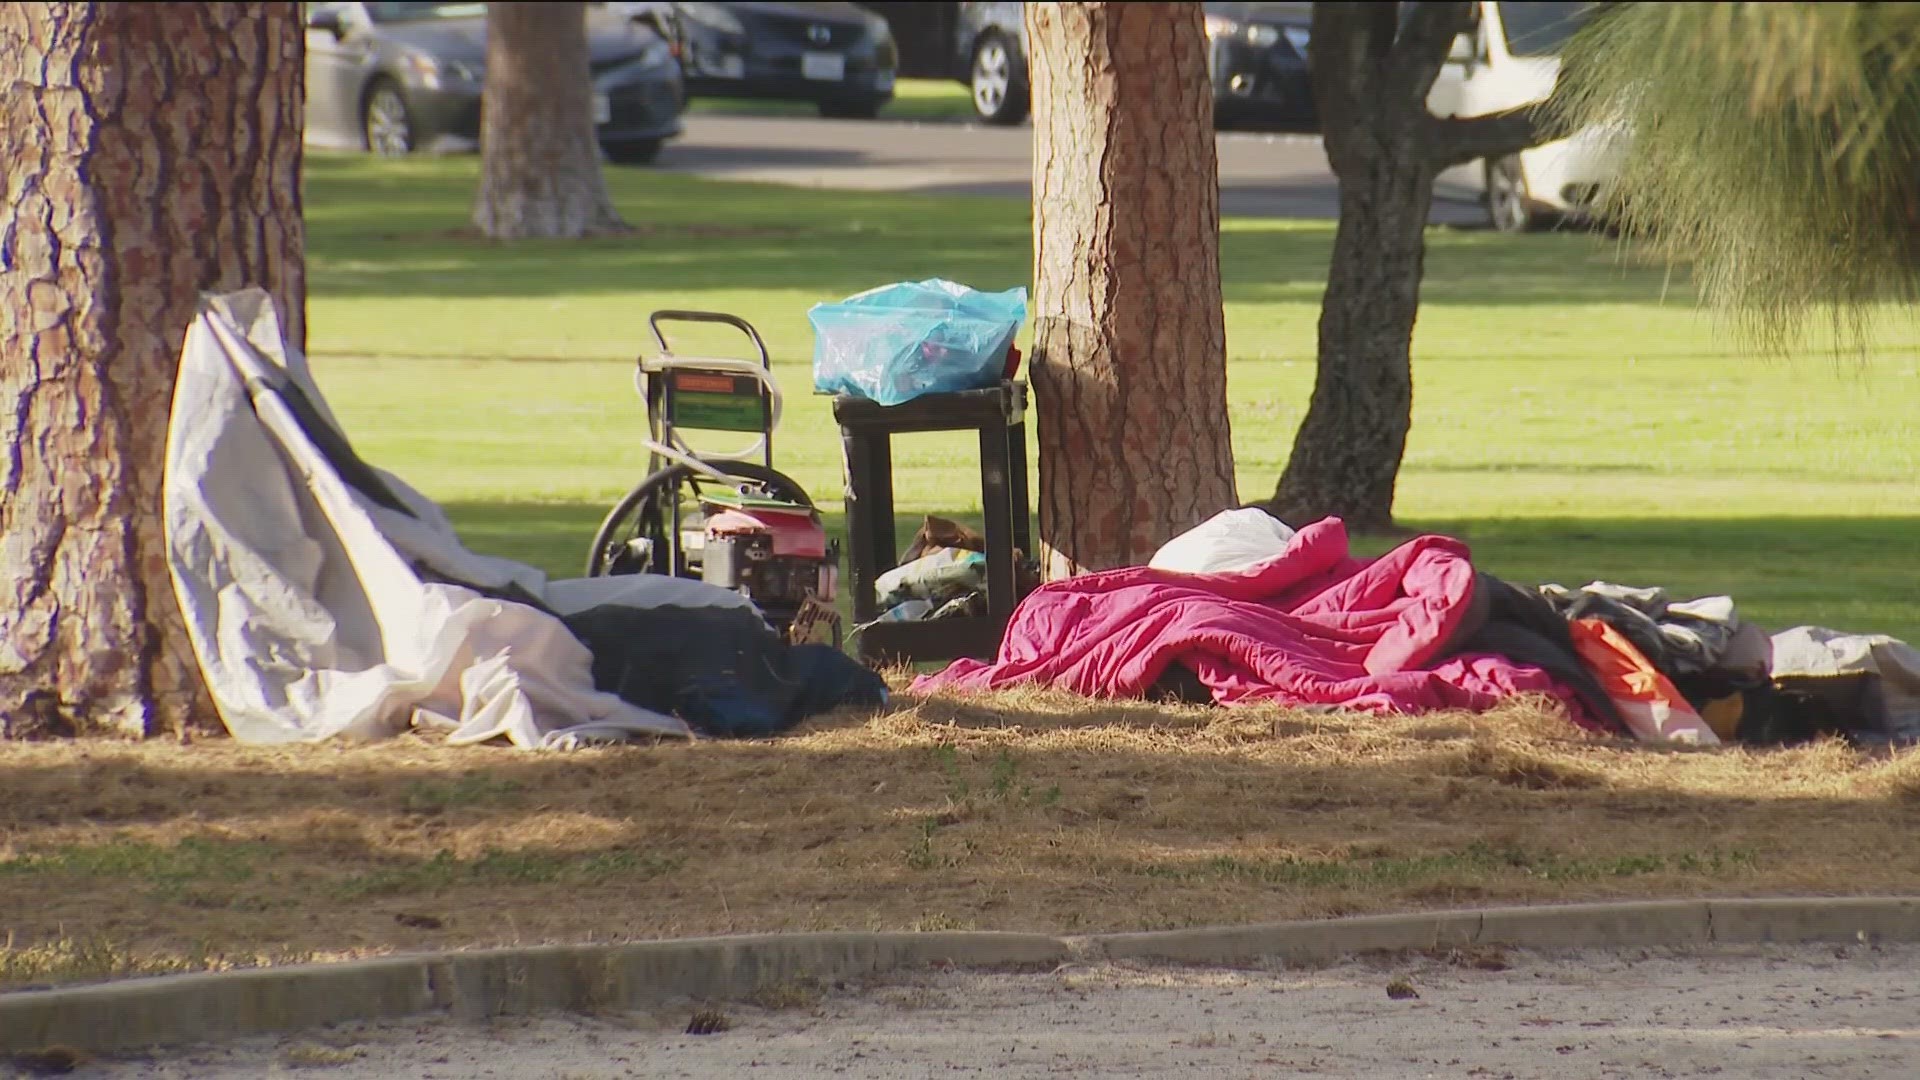 The 2023 point-in-time count released by the Regional Task Force on Homelessness shows a minimum of 6,500 people experiencing homelessness in the City of San Diego.